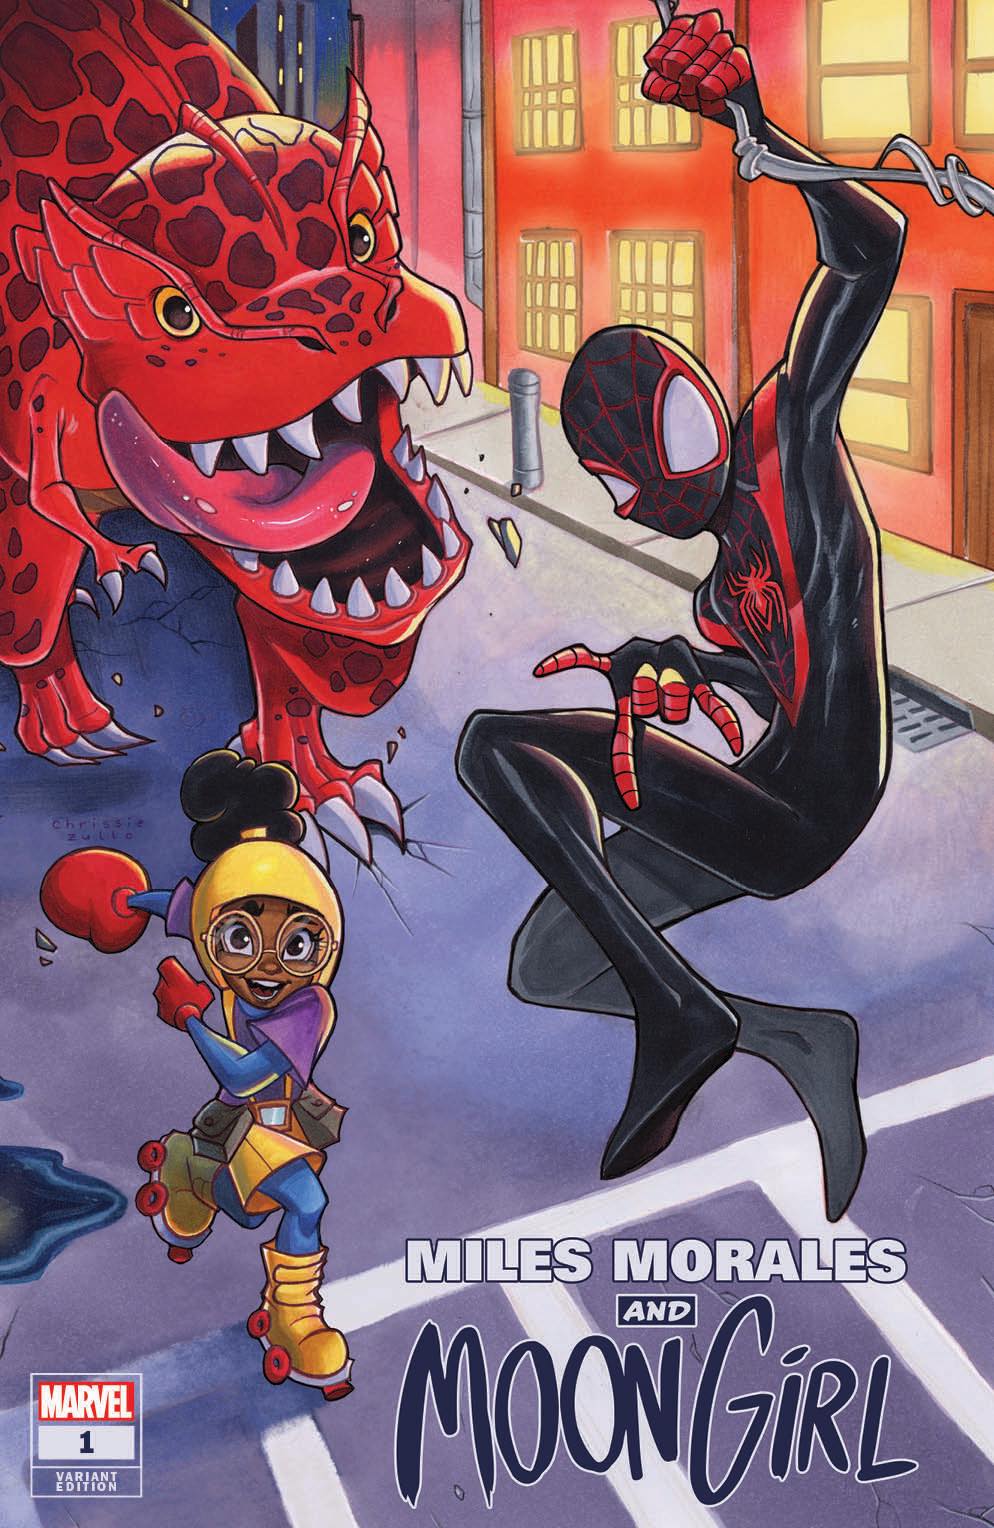 MOON GIRL AND MILES MORALES #1 Chrissie Zullo Exclusive!